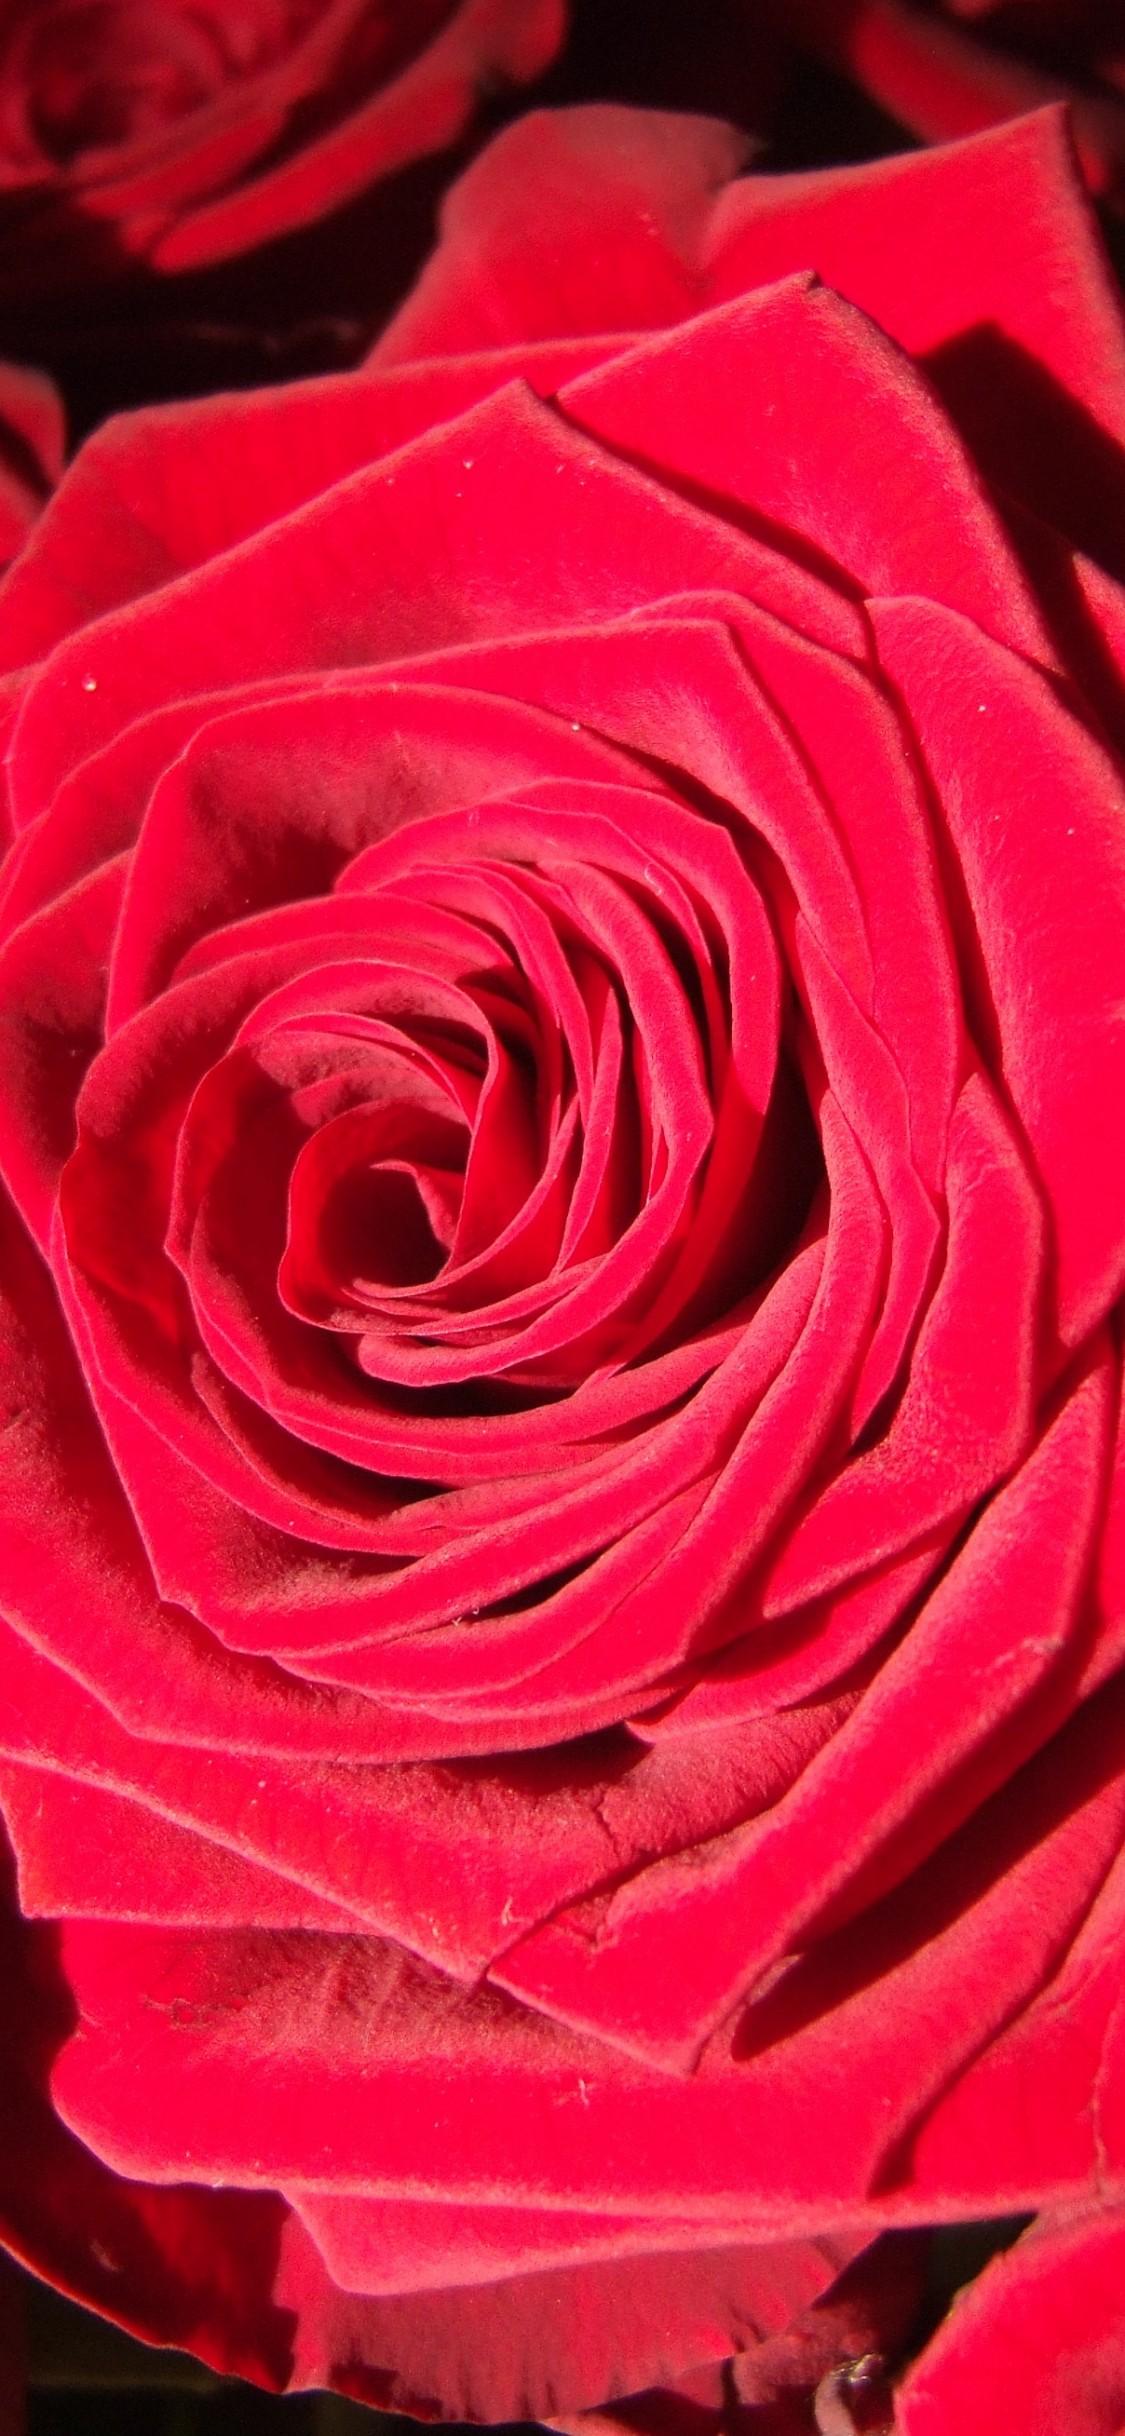 Red Roses iPhone Wallpaper. Download free HD image